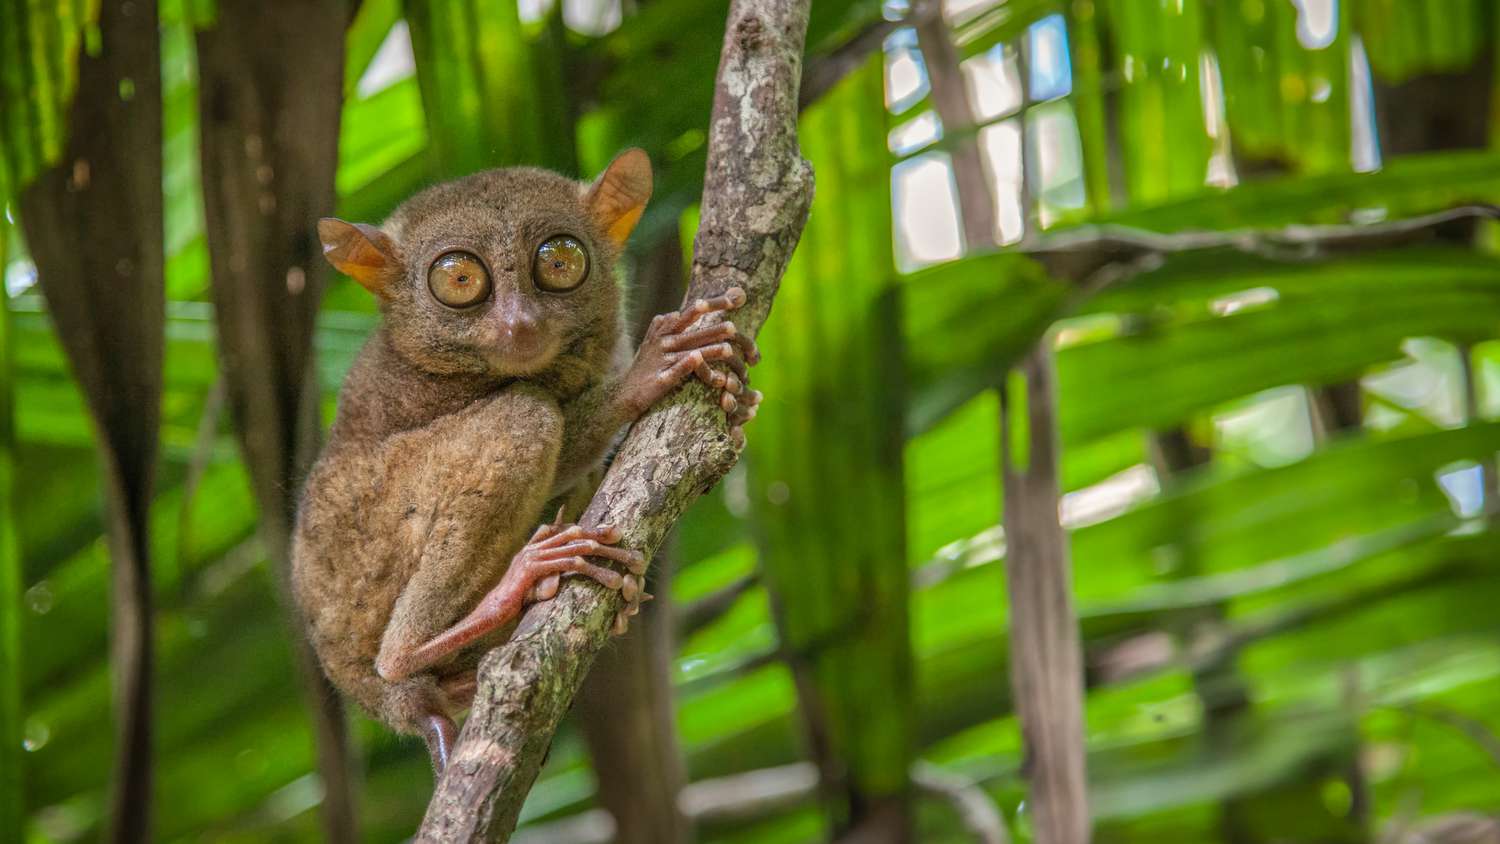 Philippines tarsier on narrow tree branch with view of very long feet and digits